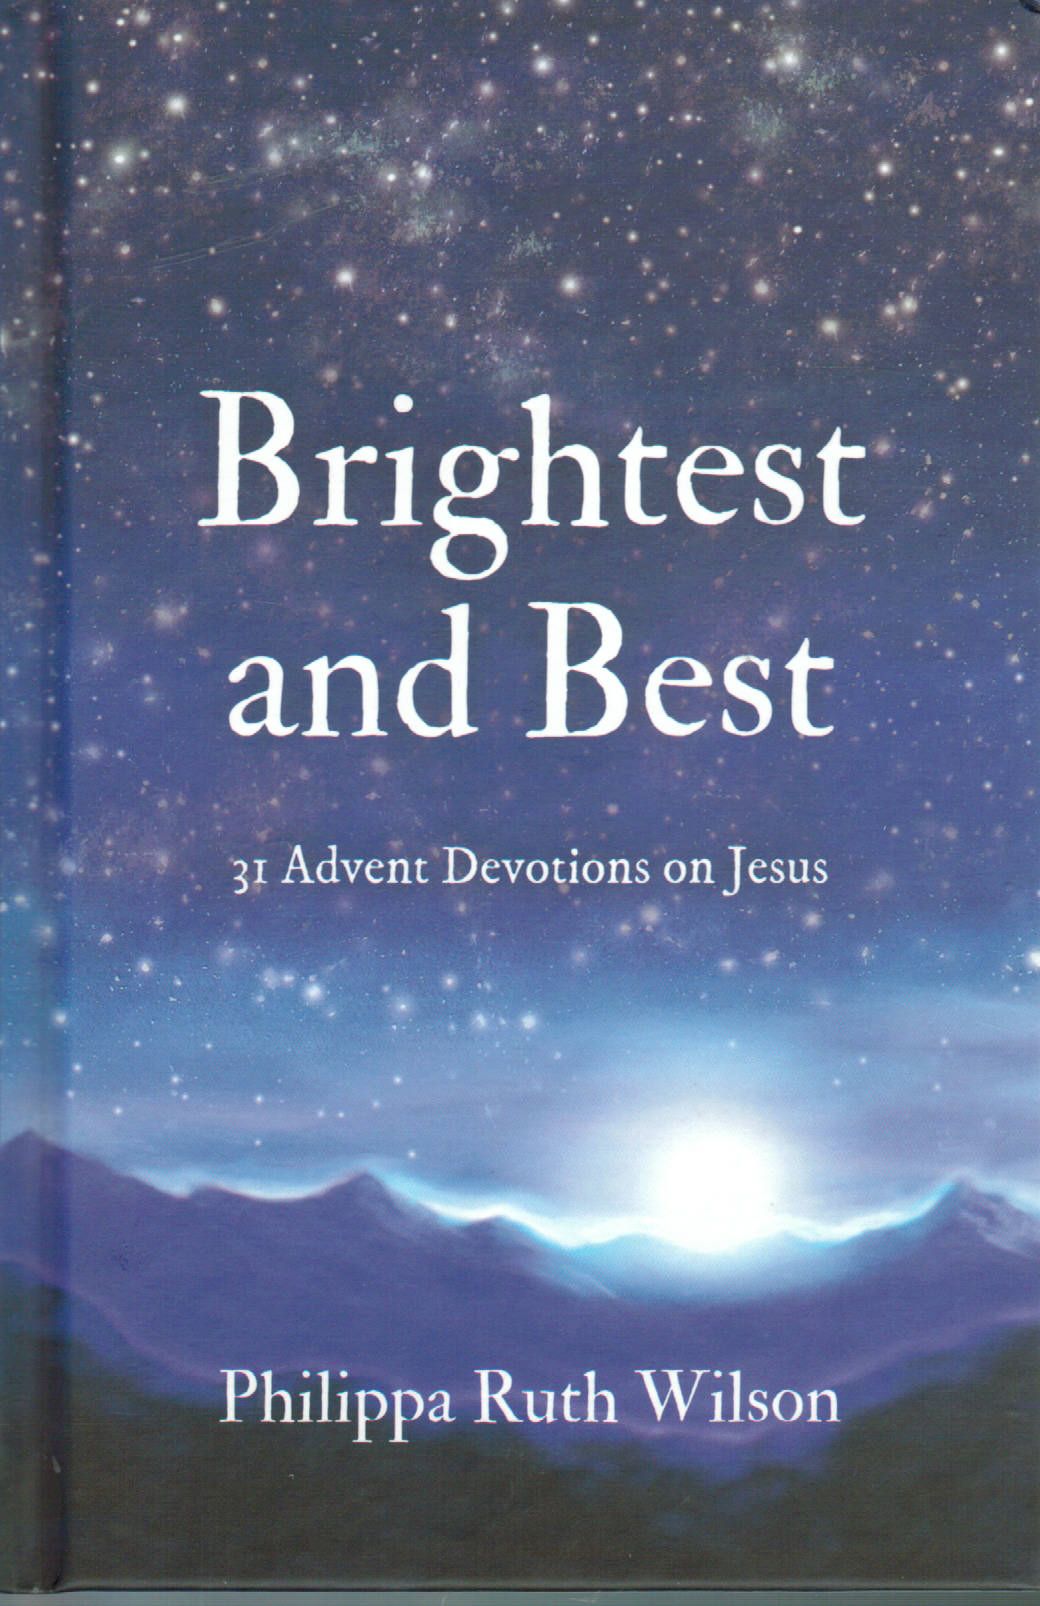 Brightest and Best: 31 Advent Devotions on Jesus